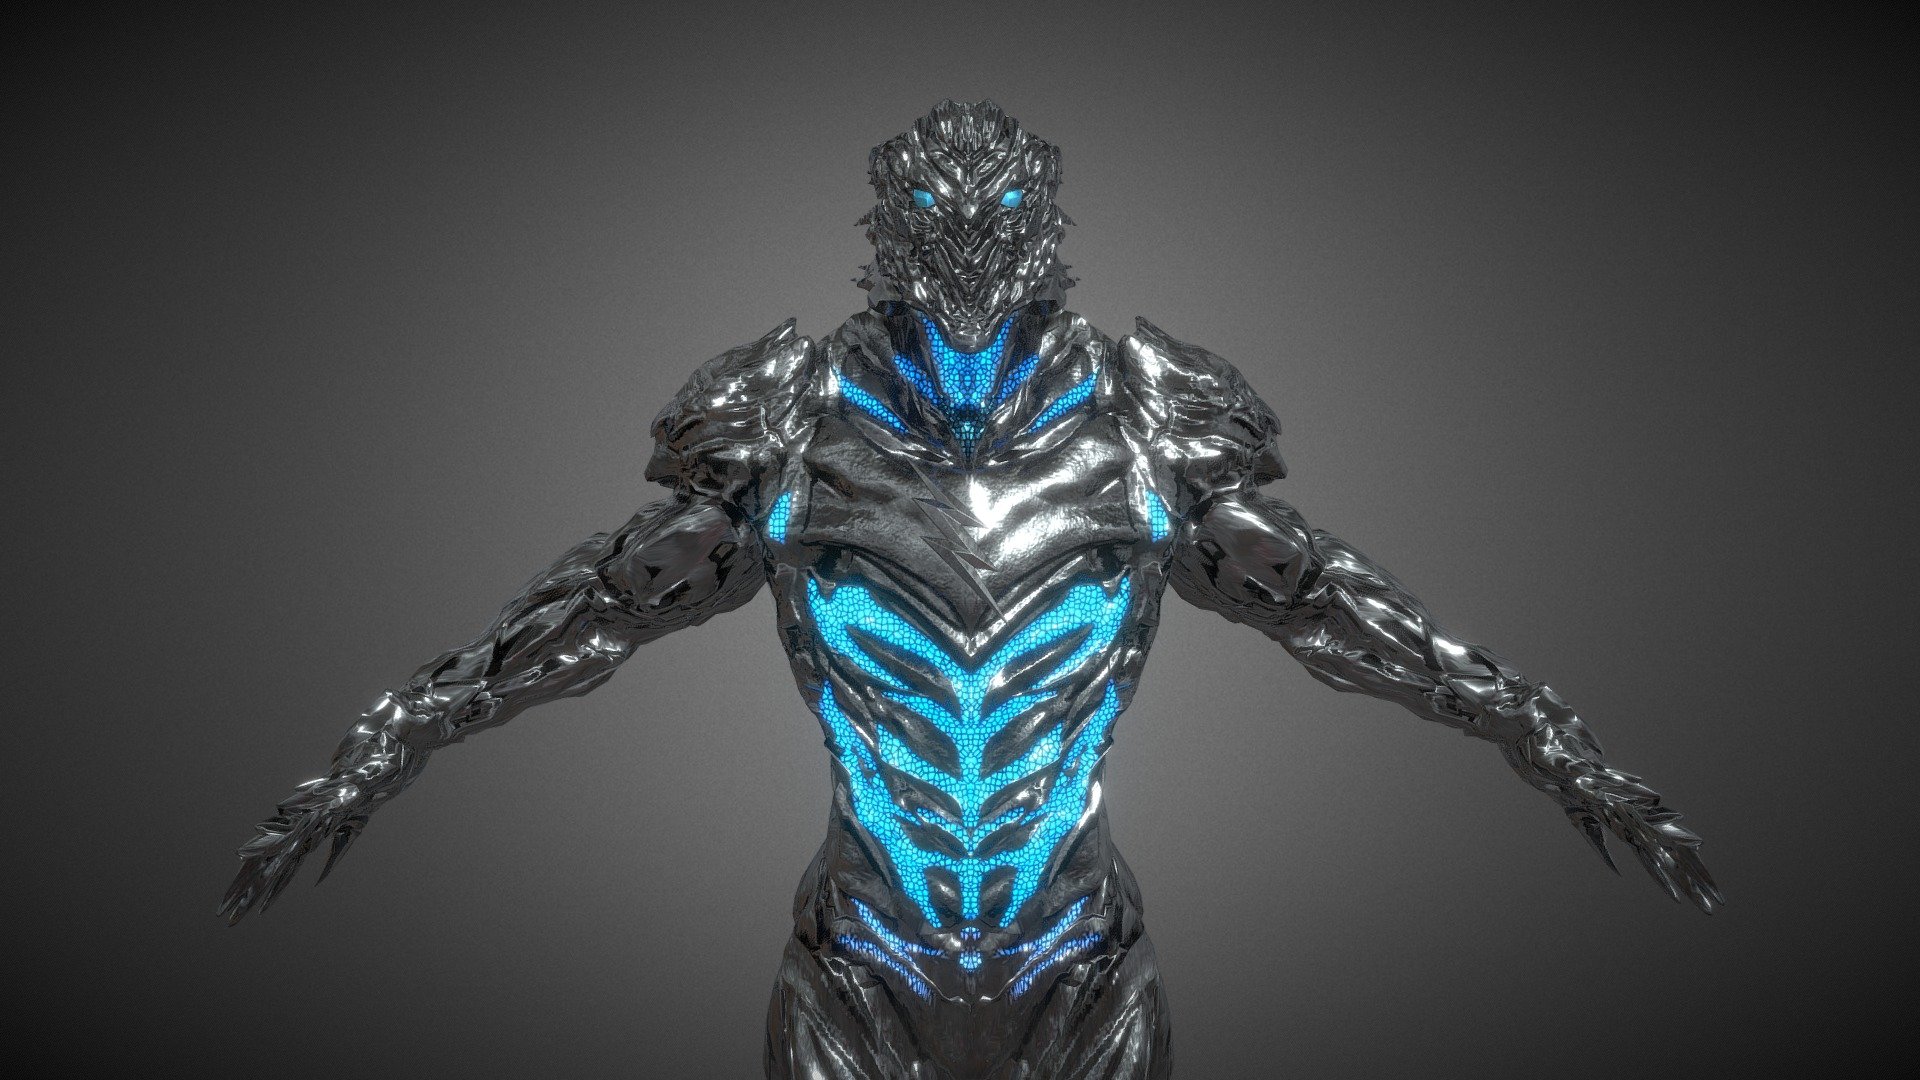 Savitar Model Re-Worked. My Part was the back which re-made fro scratch to match the The Flash Show.

Original model credits - https://www.deviantart.com/blinkjisooxps/art/The-Flash-Savitar-801743027
.
.
HD Renders - 
https://www.deviantart.com/9afilms/art/Savitar-3D-Model-Run-Pose-2-959313190
https://www.deviantart.com/9afilms/art/Savitar-3D-Model-Run-Pose-959313104
https://www.deviantart.com/9afilms/art/Savitar-3D-Model-Run-Pose-959312997
https://www.deviantart.com/9afilms/art/Savitar-3D-Model-Close-up-959312572
https://www.deviantart.com/9afilms/art/Savitar-3D-Model-Close-up-959312716
https://www.deviantart.com/9afilms/art/Savitar-3D-Model-959312877
https://www.deviantart.com/9afilms/art/Savitar-3D-Model-959209476 - Savitar | Future Flash | Re-Worked 3D Model - 3D model by 9A Films / Nihar Arora (@Nihar-9Afilms) 3d model